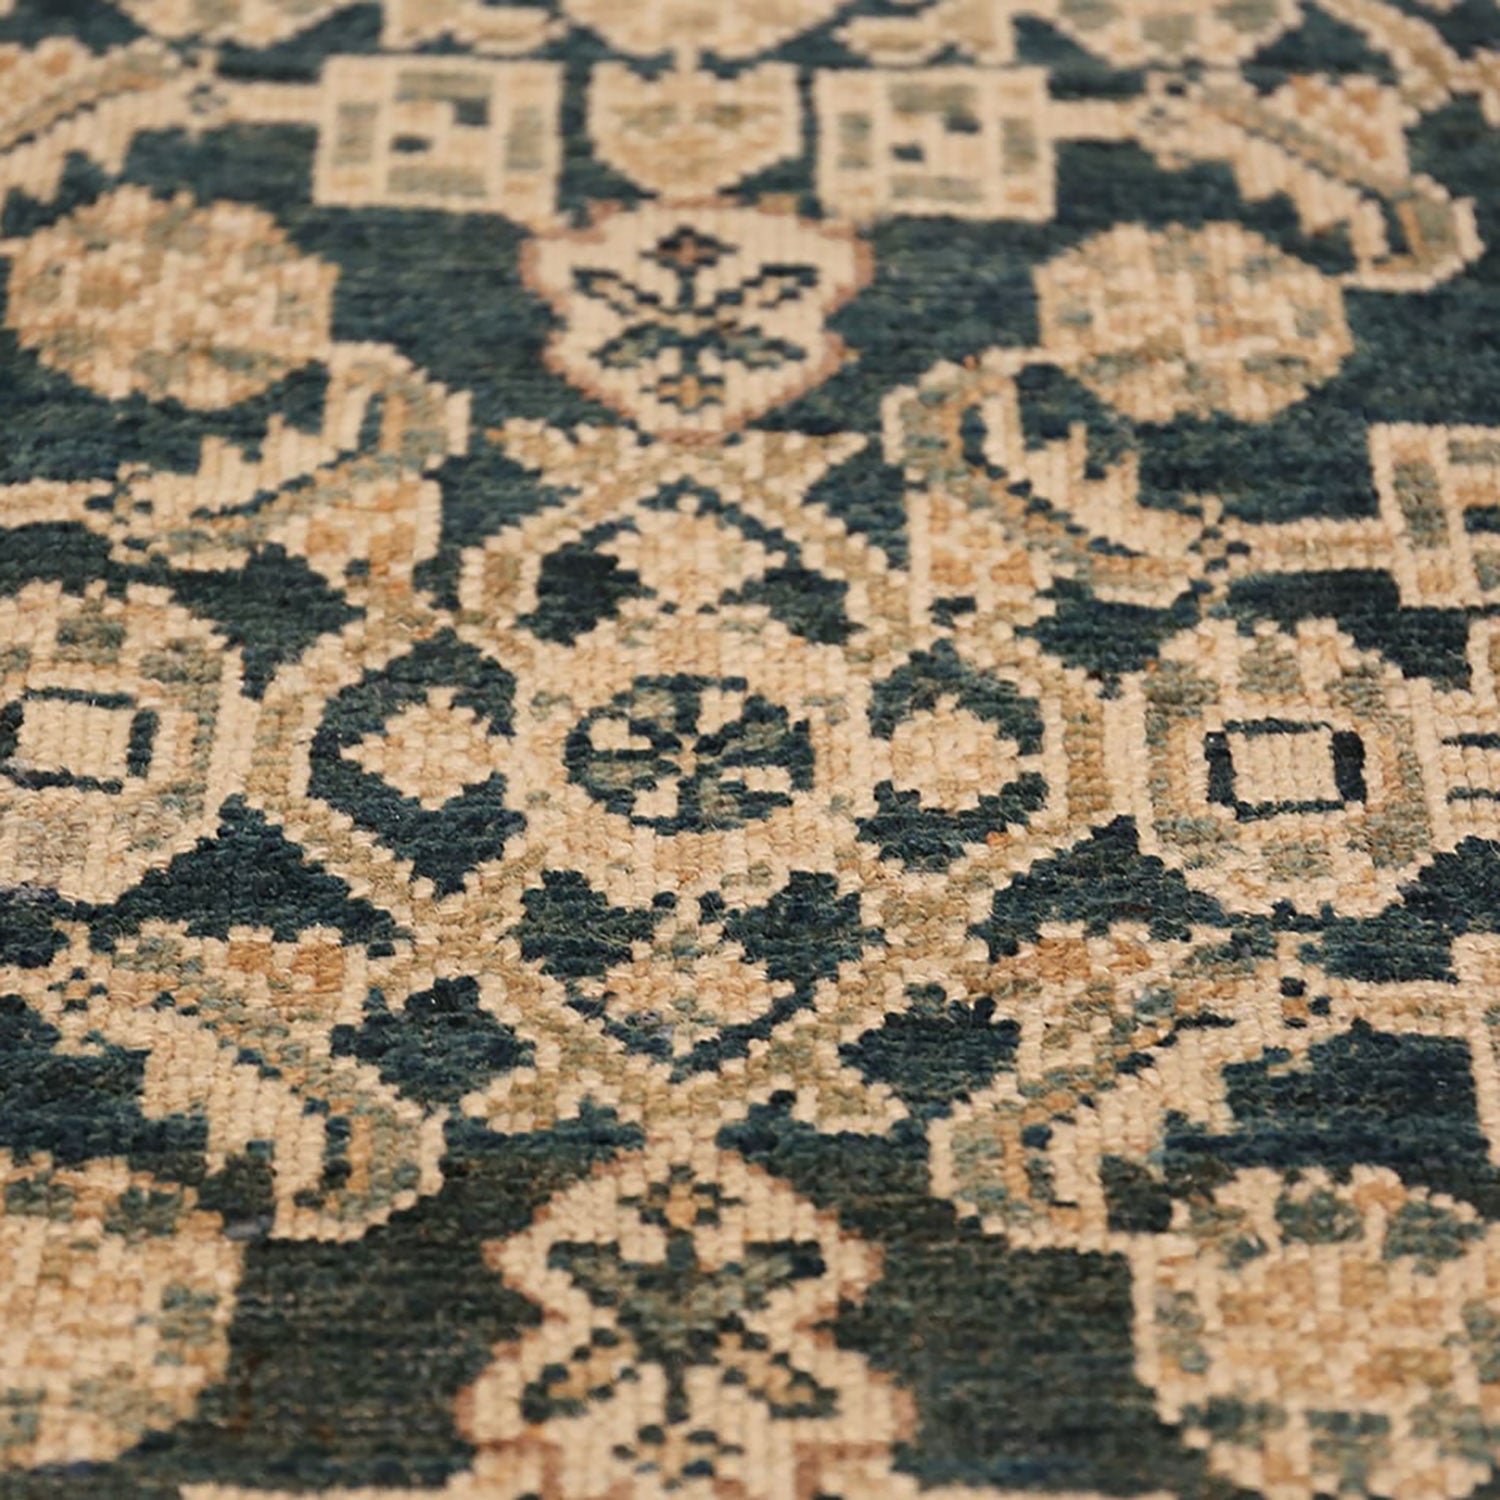 Close-up of a intricate patterned carpet with geometric shapes.